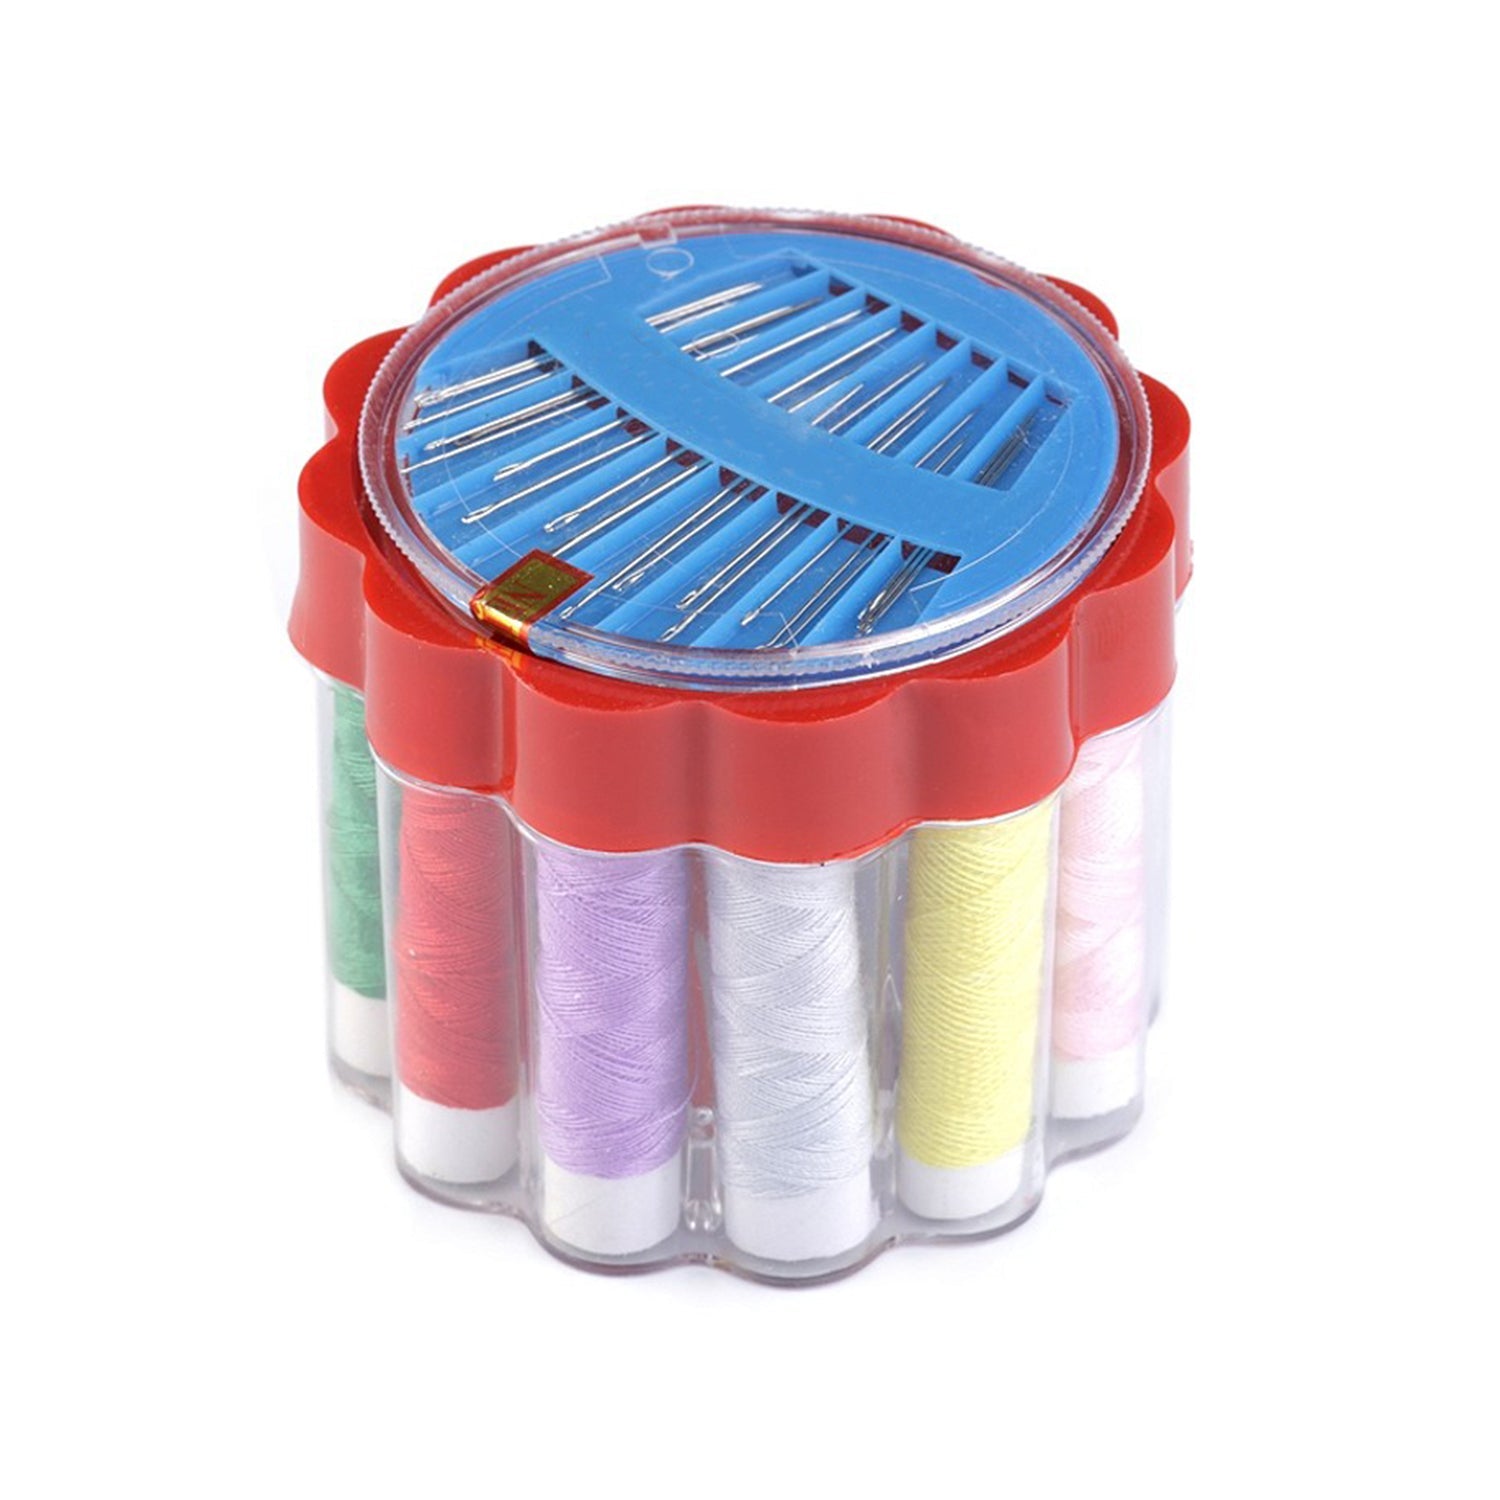 6050 24 Pc Sewing Box used in storing of thread roles and sewing stuff including all home purposes.